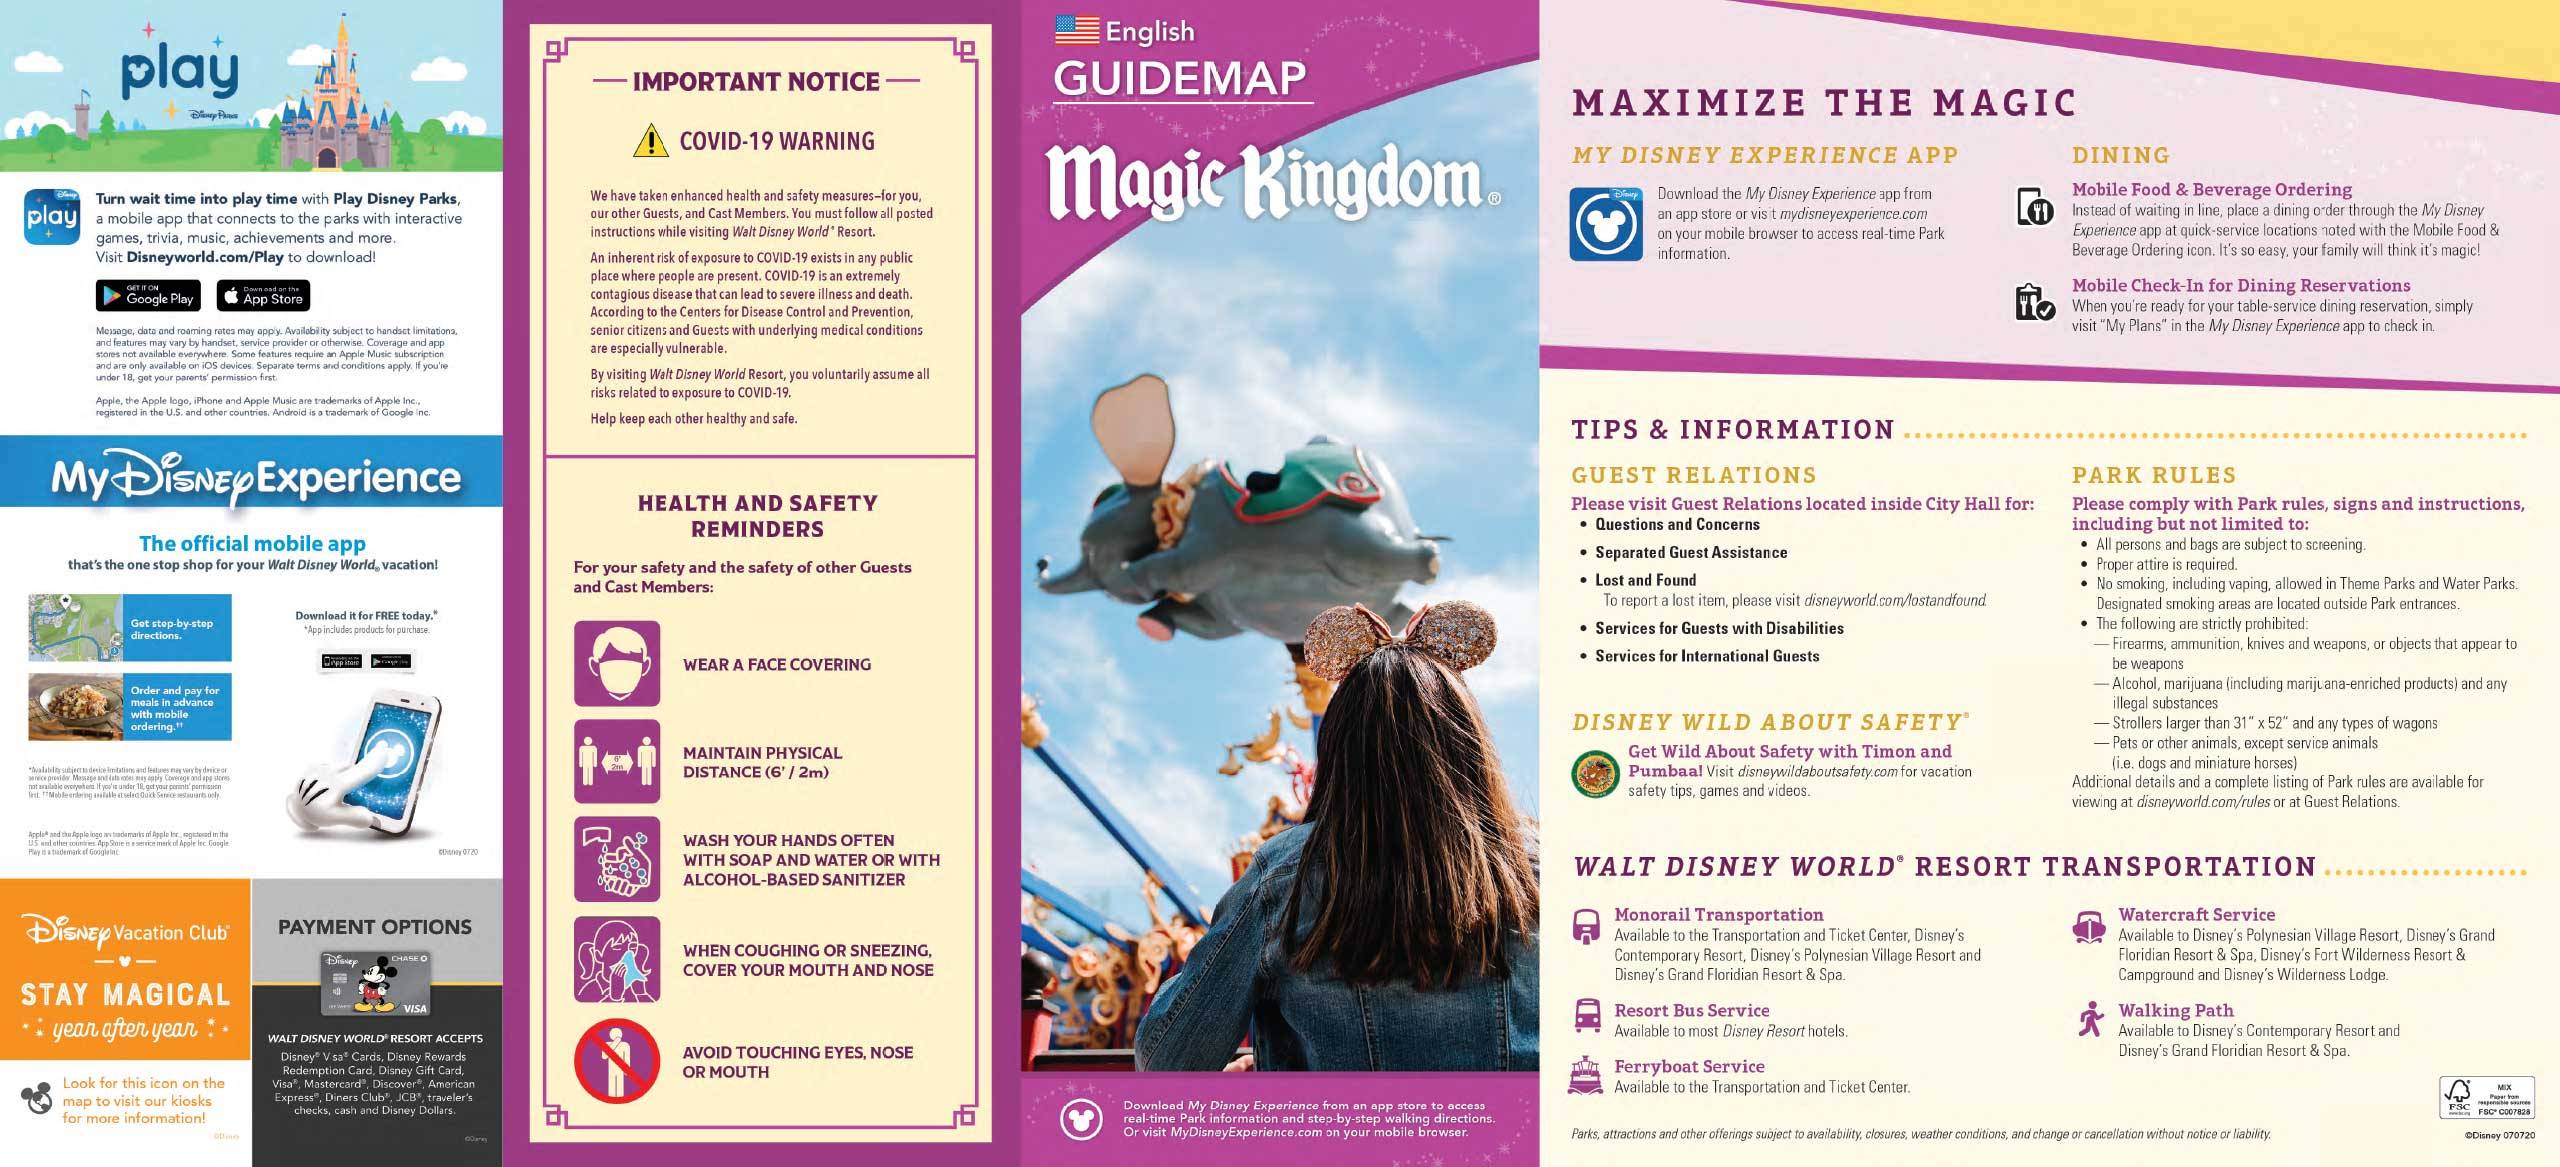 Magic Kingdom Guide Map July 2020 - Front